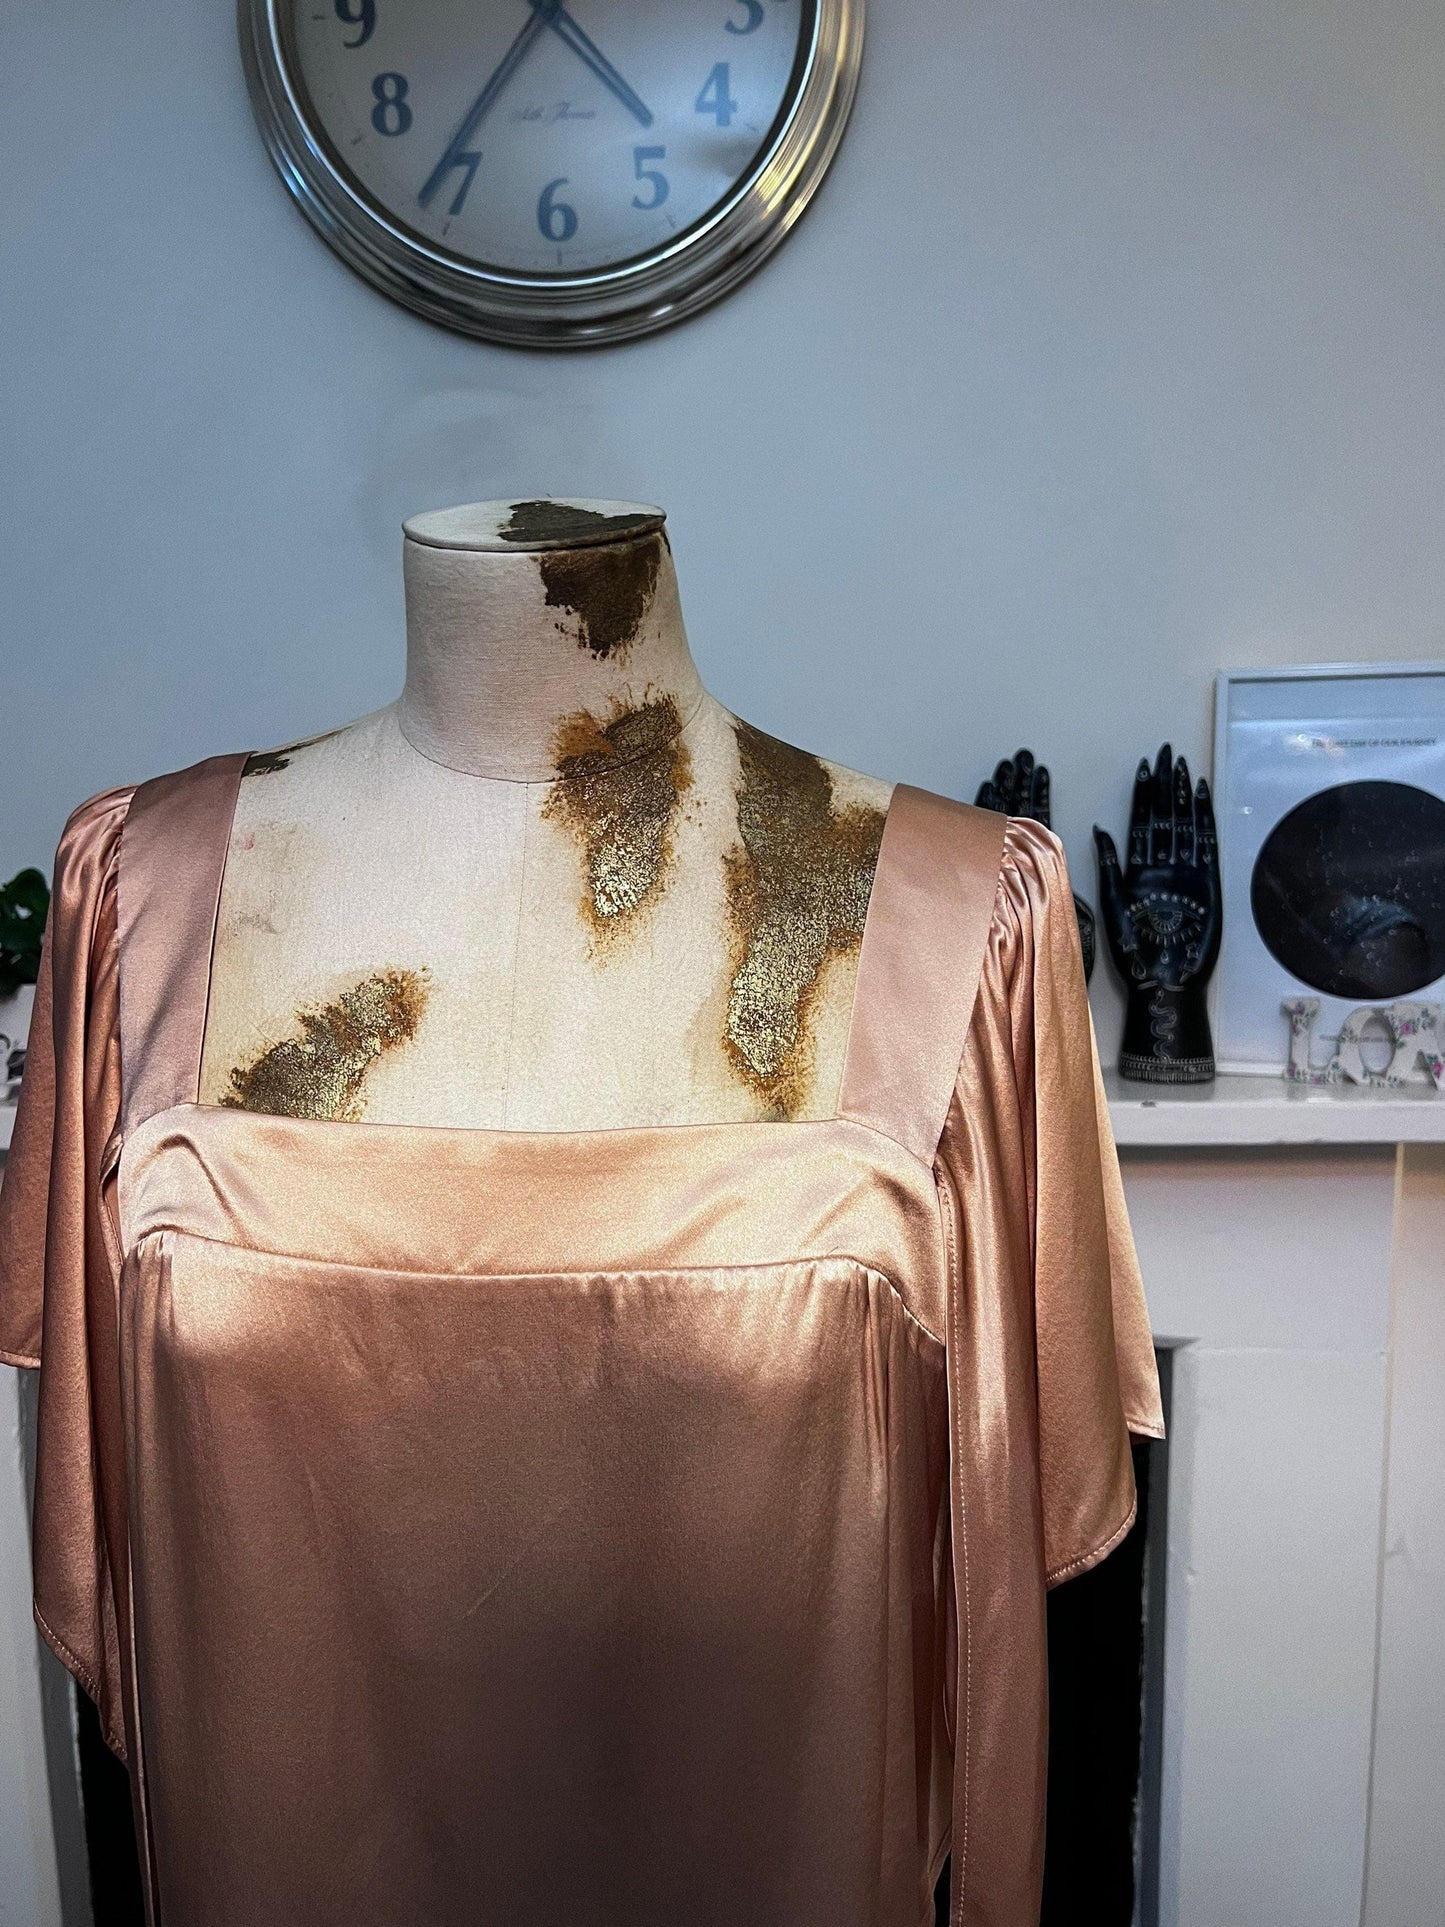 Vintage Rose Gold Silk Blouse - Paul and Joe Paris Silk Top - French Silk Blouse - Immaculate Vintage Blouse - Size 3